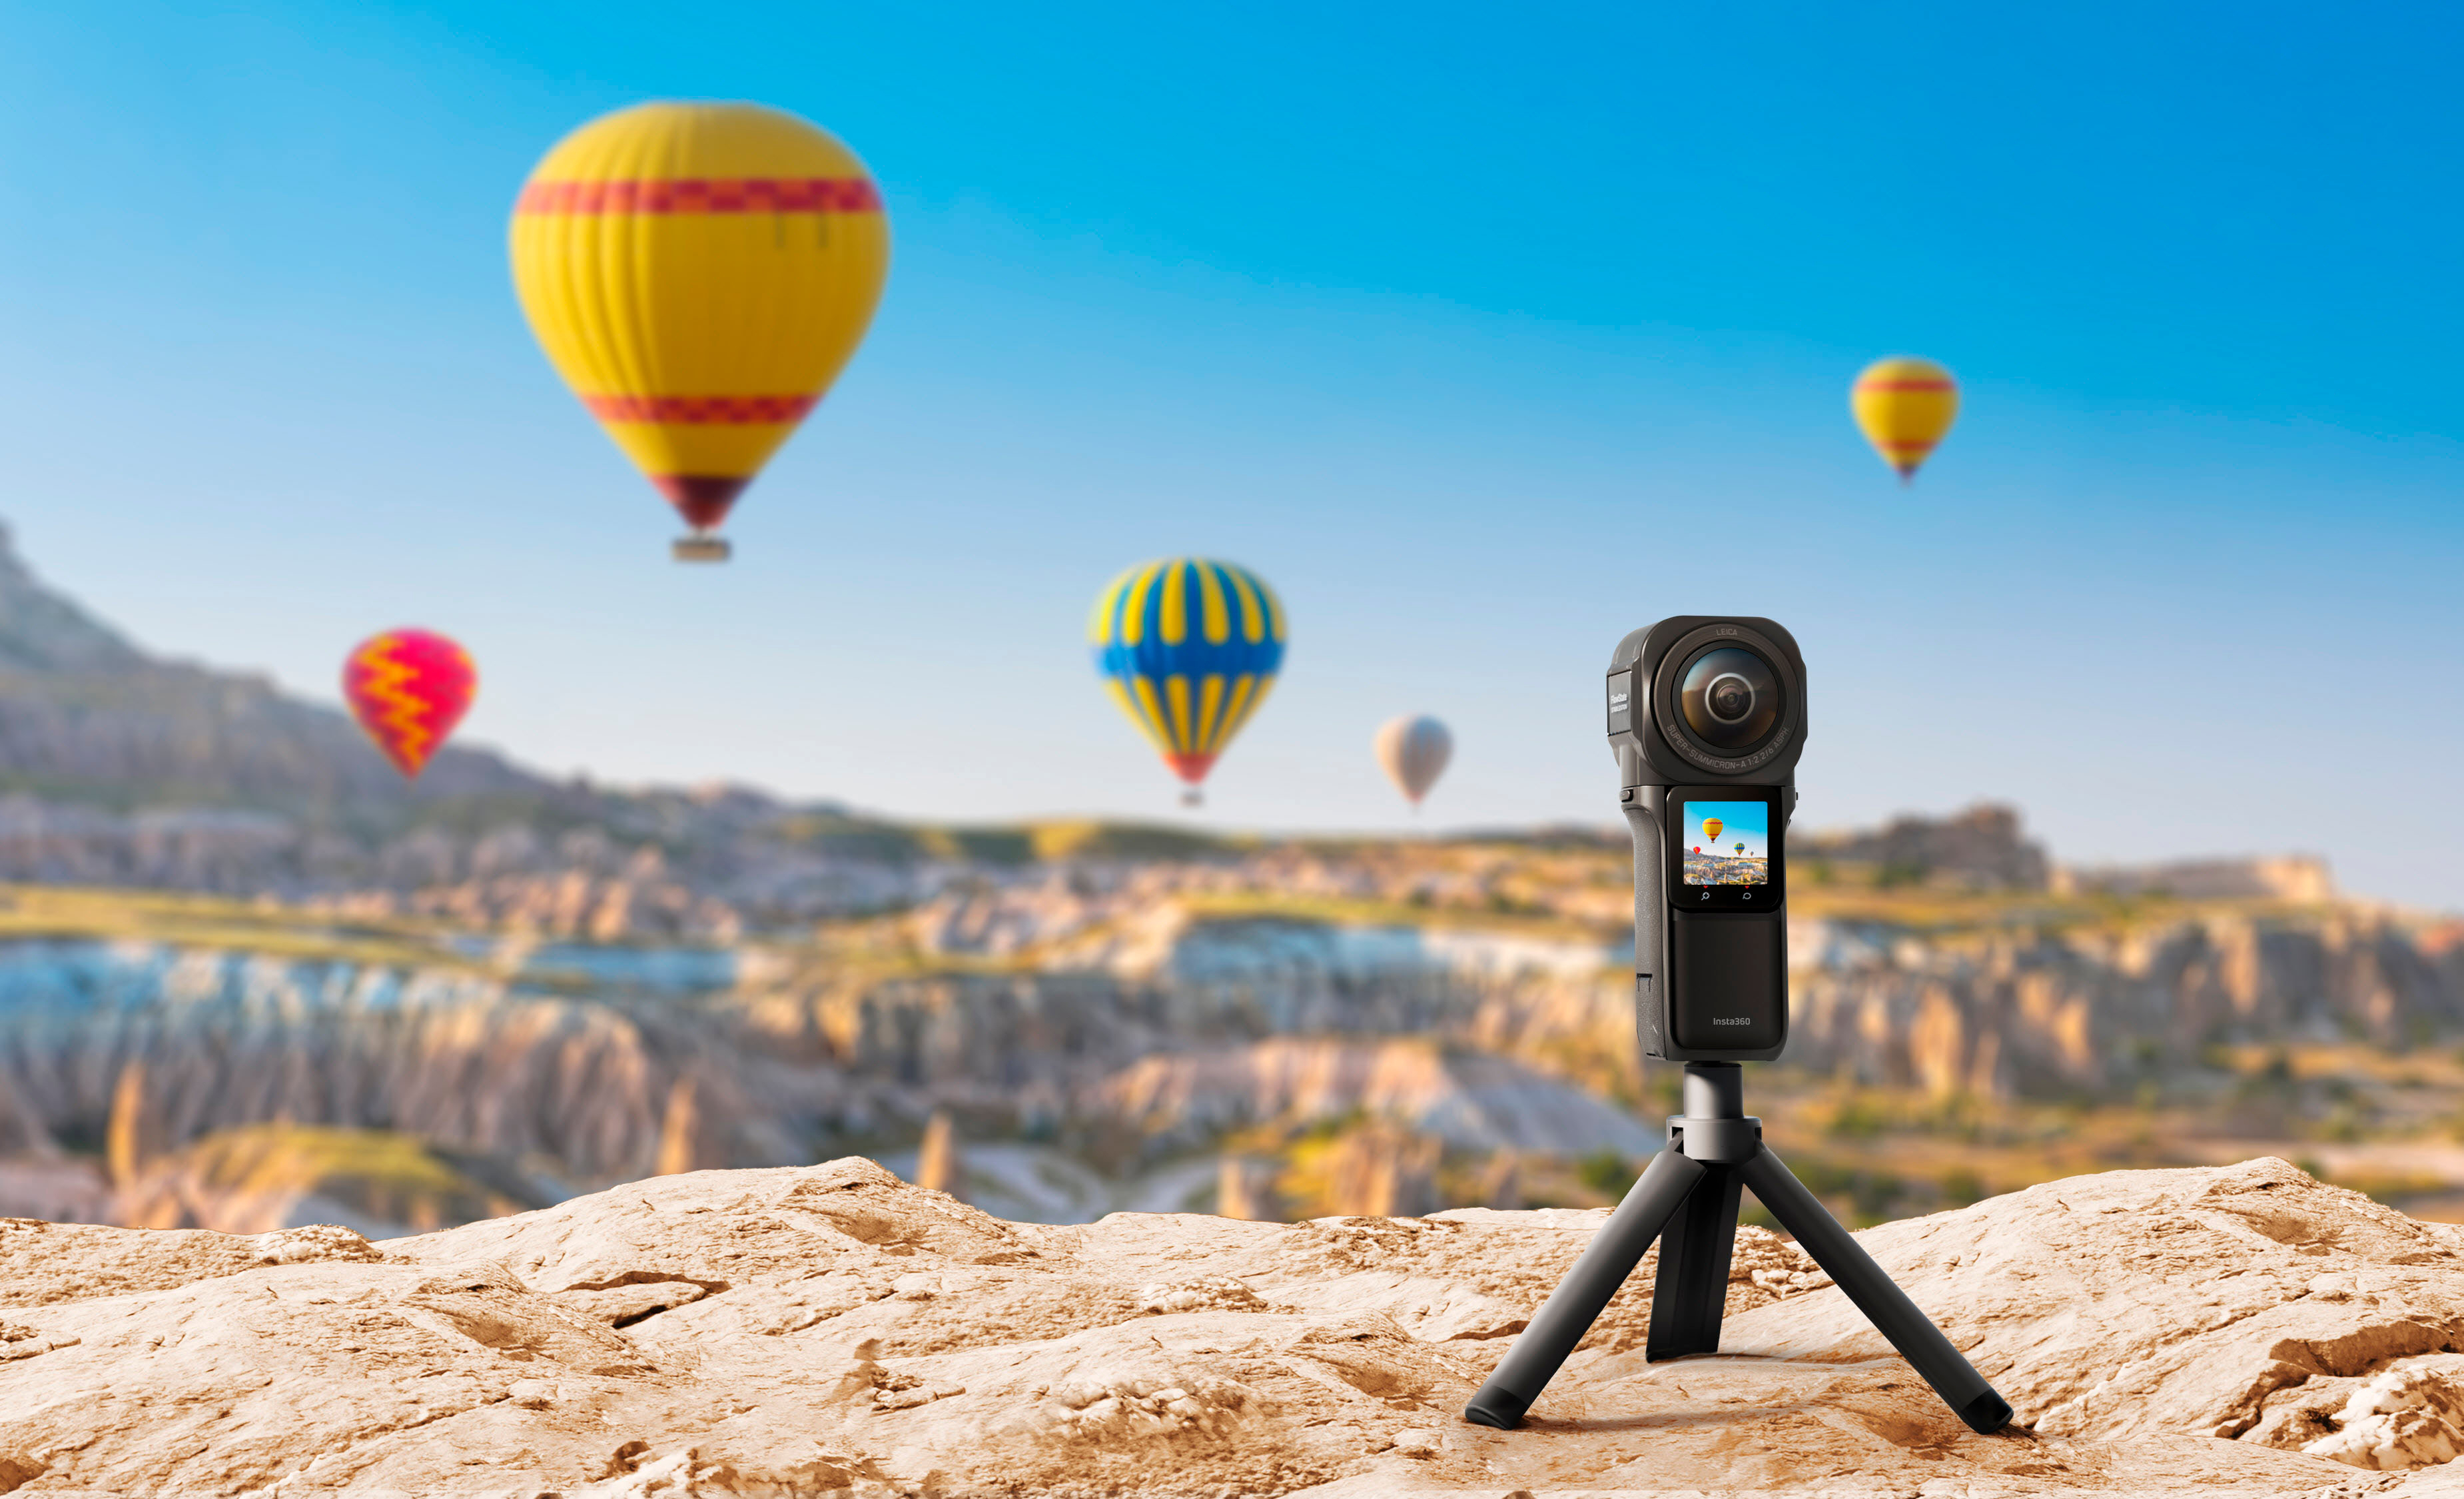 Insta360 ONE RS 1-Inch 360 Edition Camera by Insta360 at B&C Camera